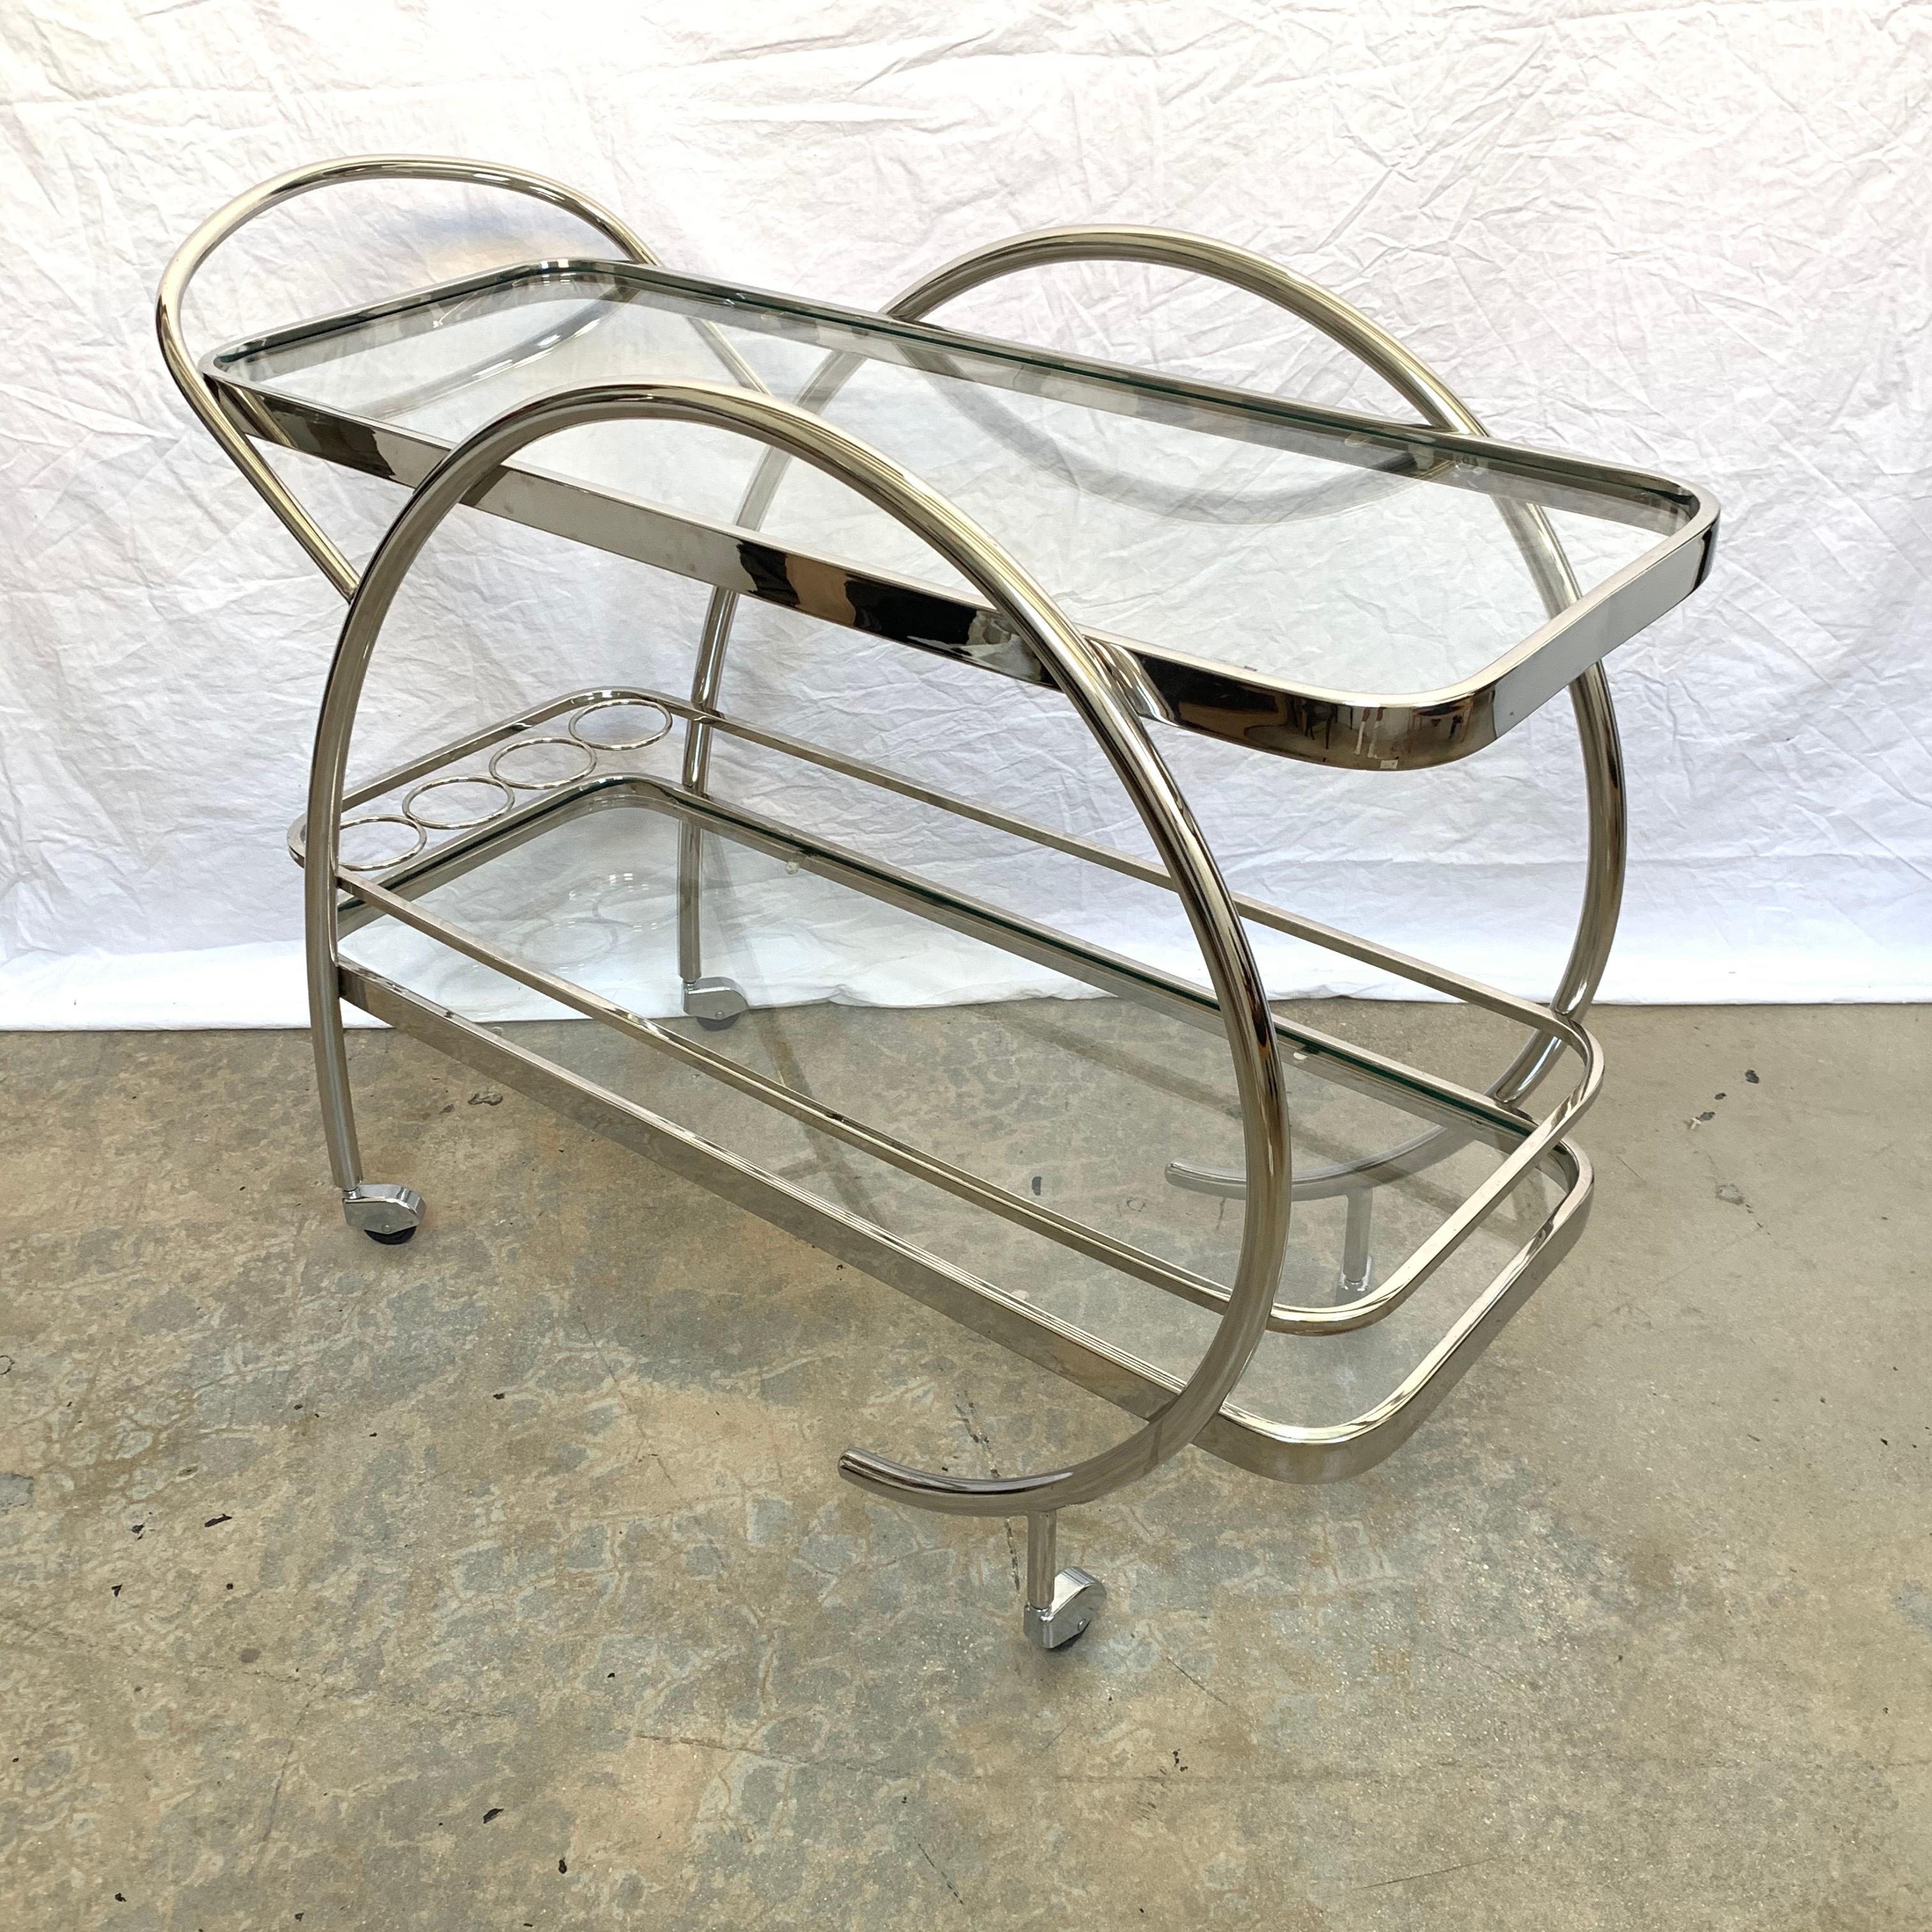 Moderne Art Deco barcart rendered in chrome-plated steel and glass on multidirectional wheels and castors.